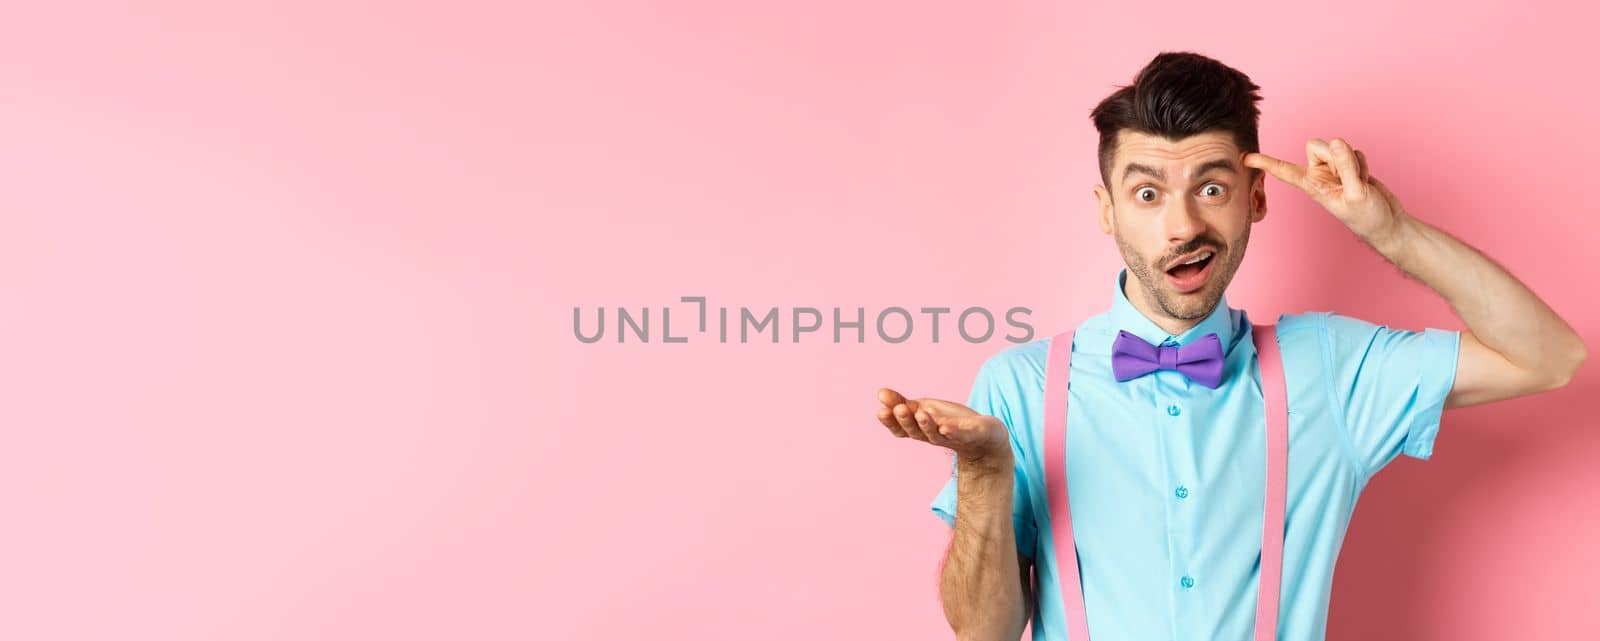 Annoyed guy mocking someone stupid, pointing finger at head and camera, are you stupid gesture, standing over pink background.